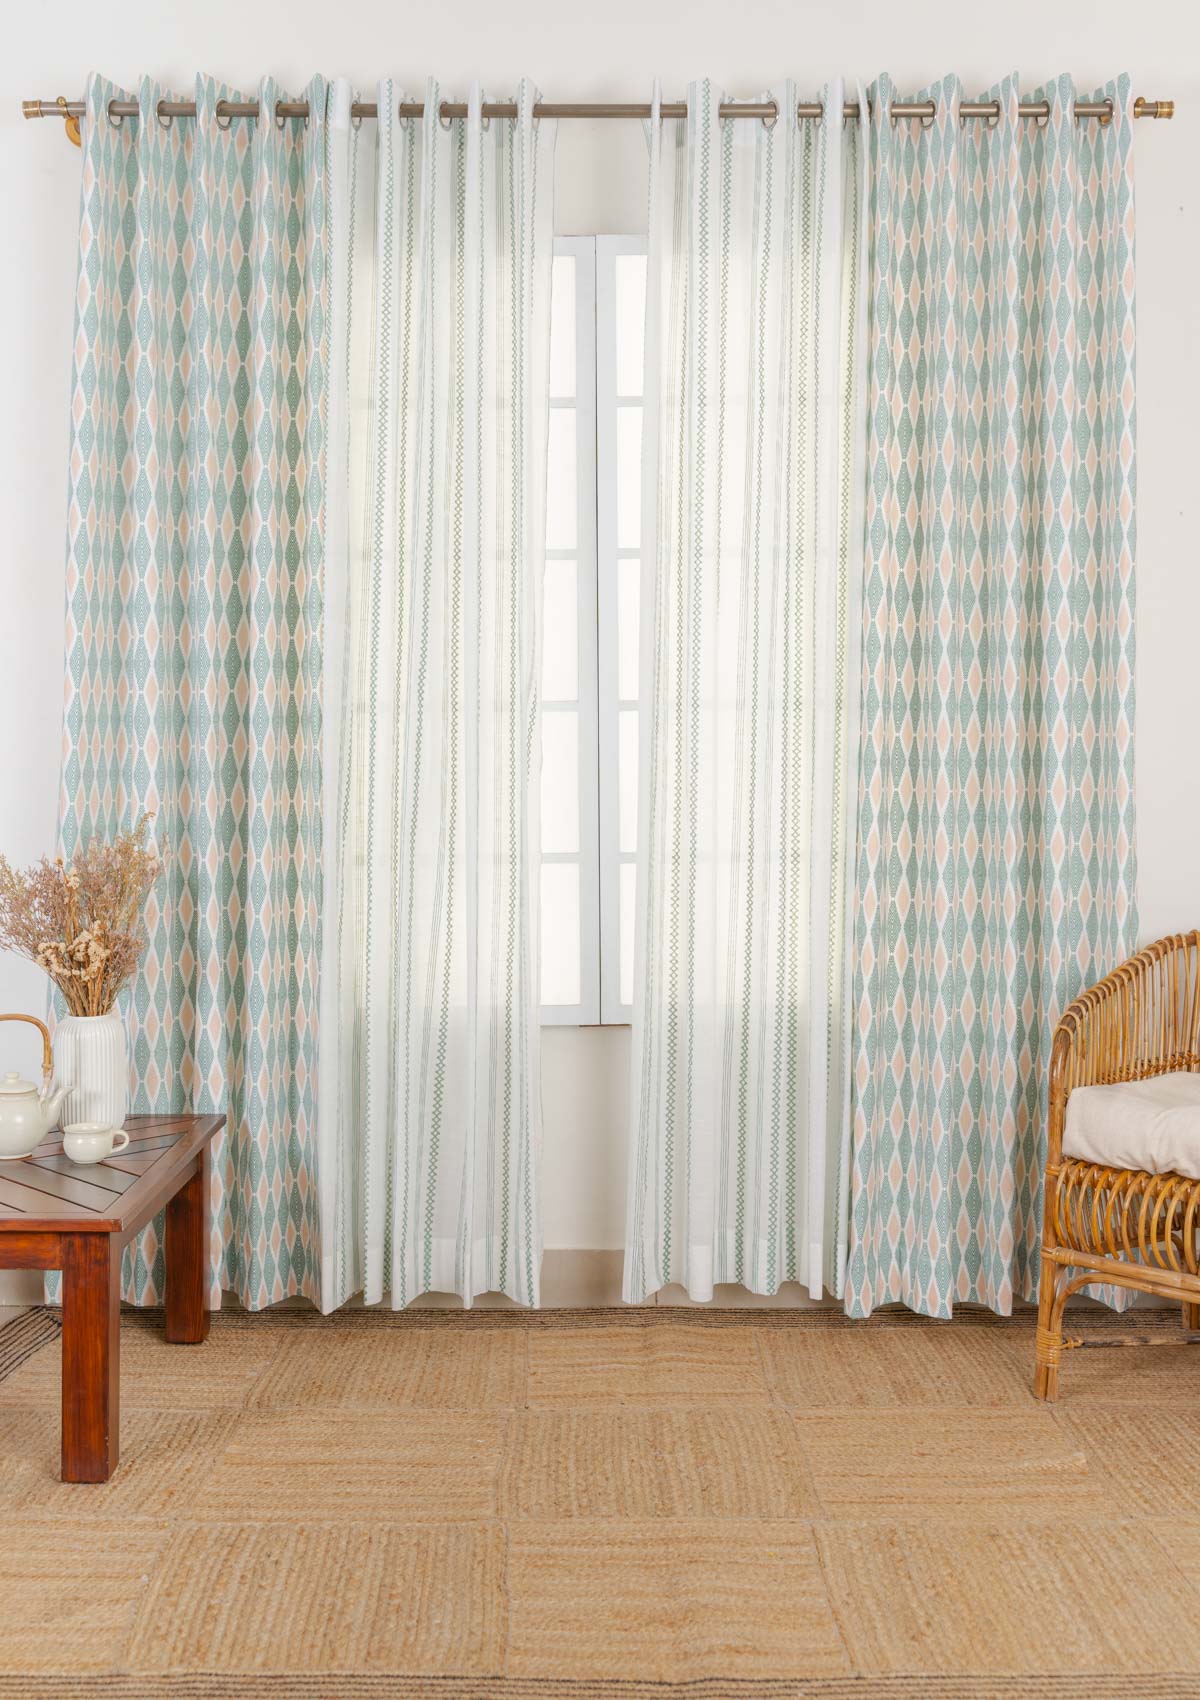 Maze cotton curtain with picket fence geometric sheer 100% cotton curtains for living room - Set of 4